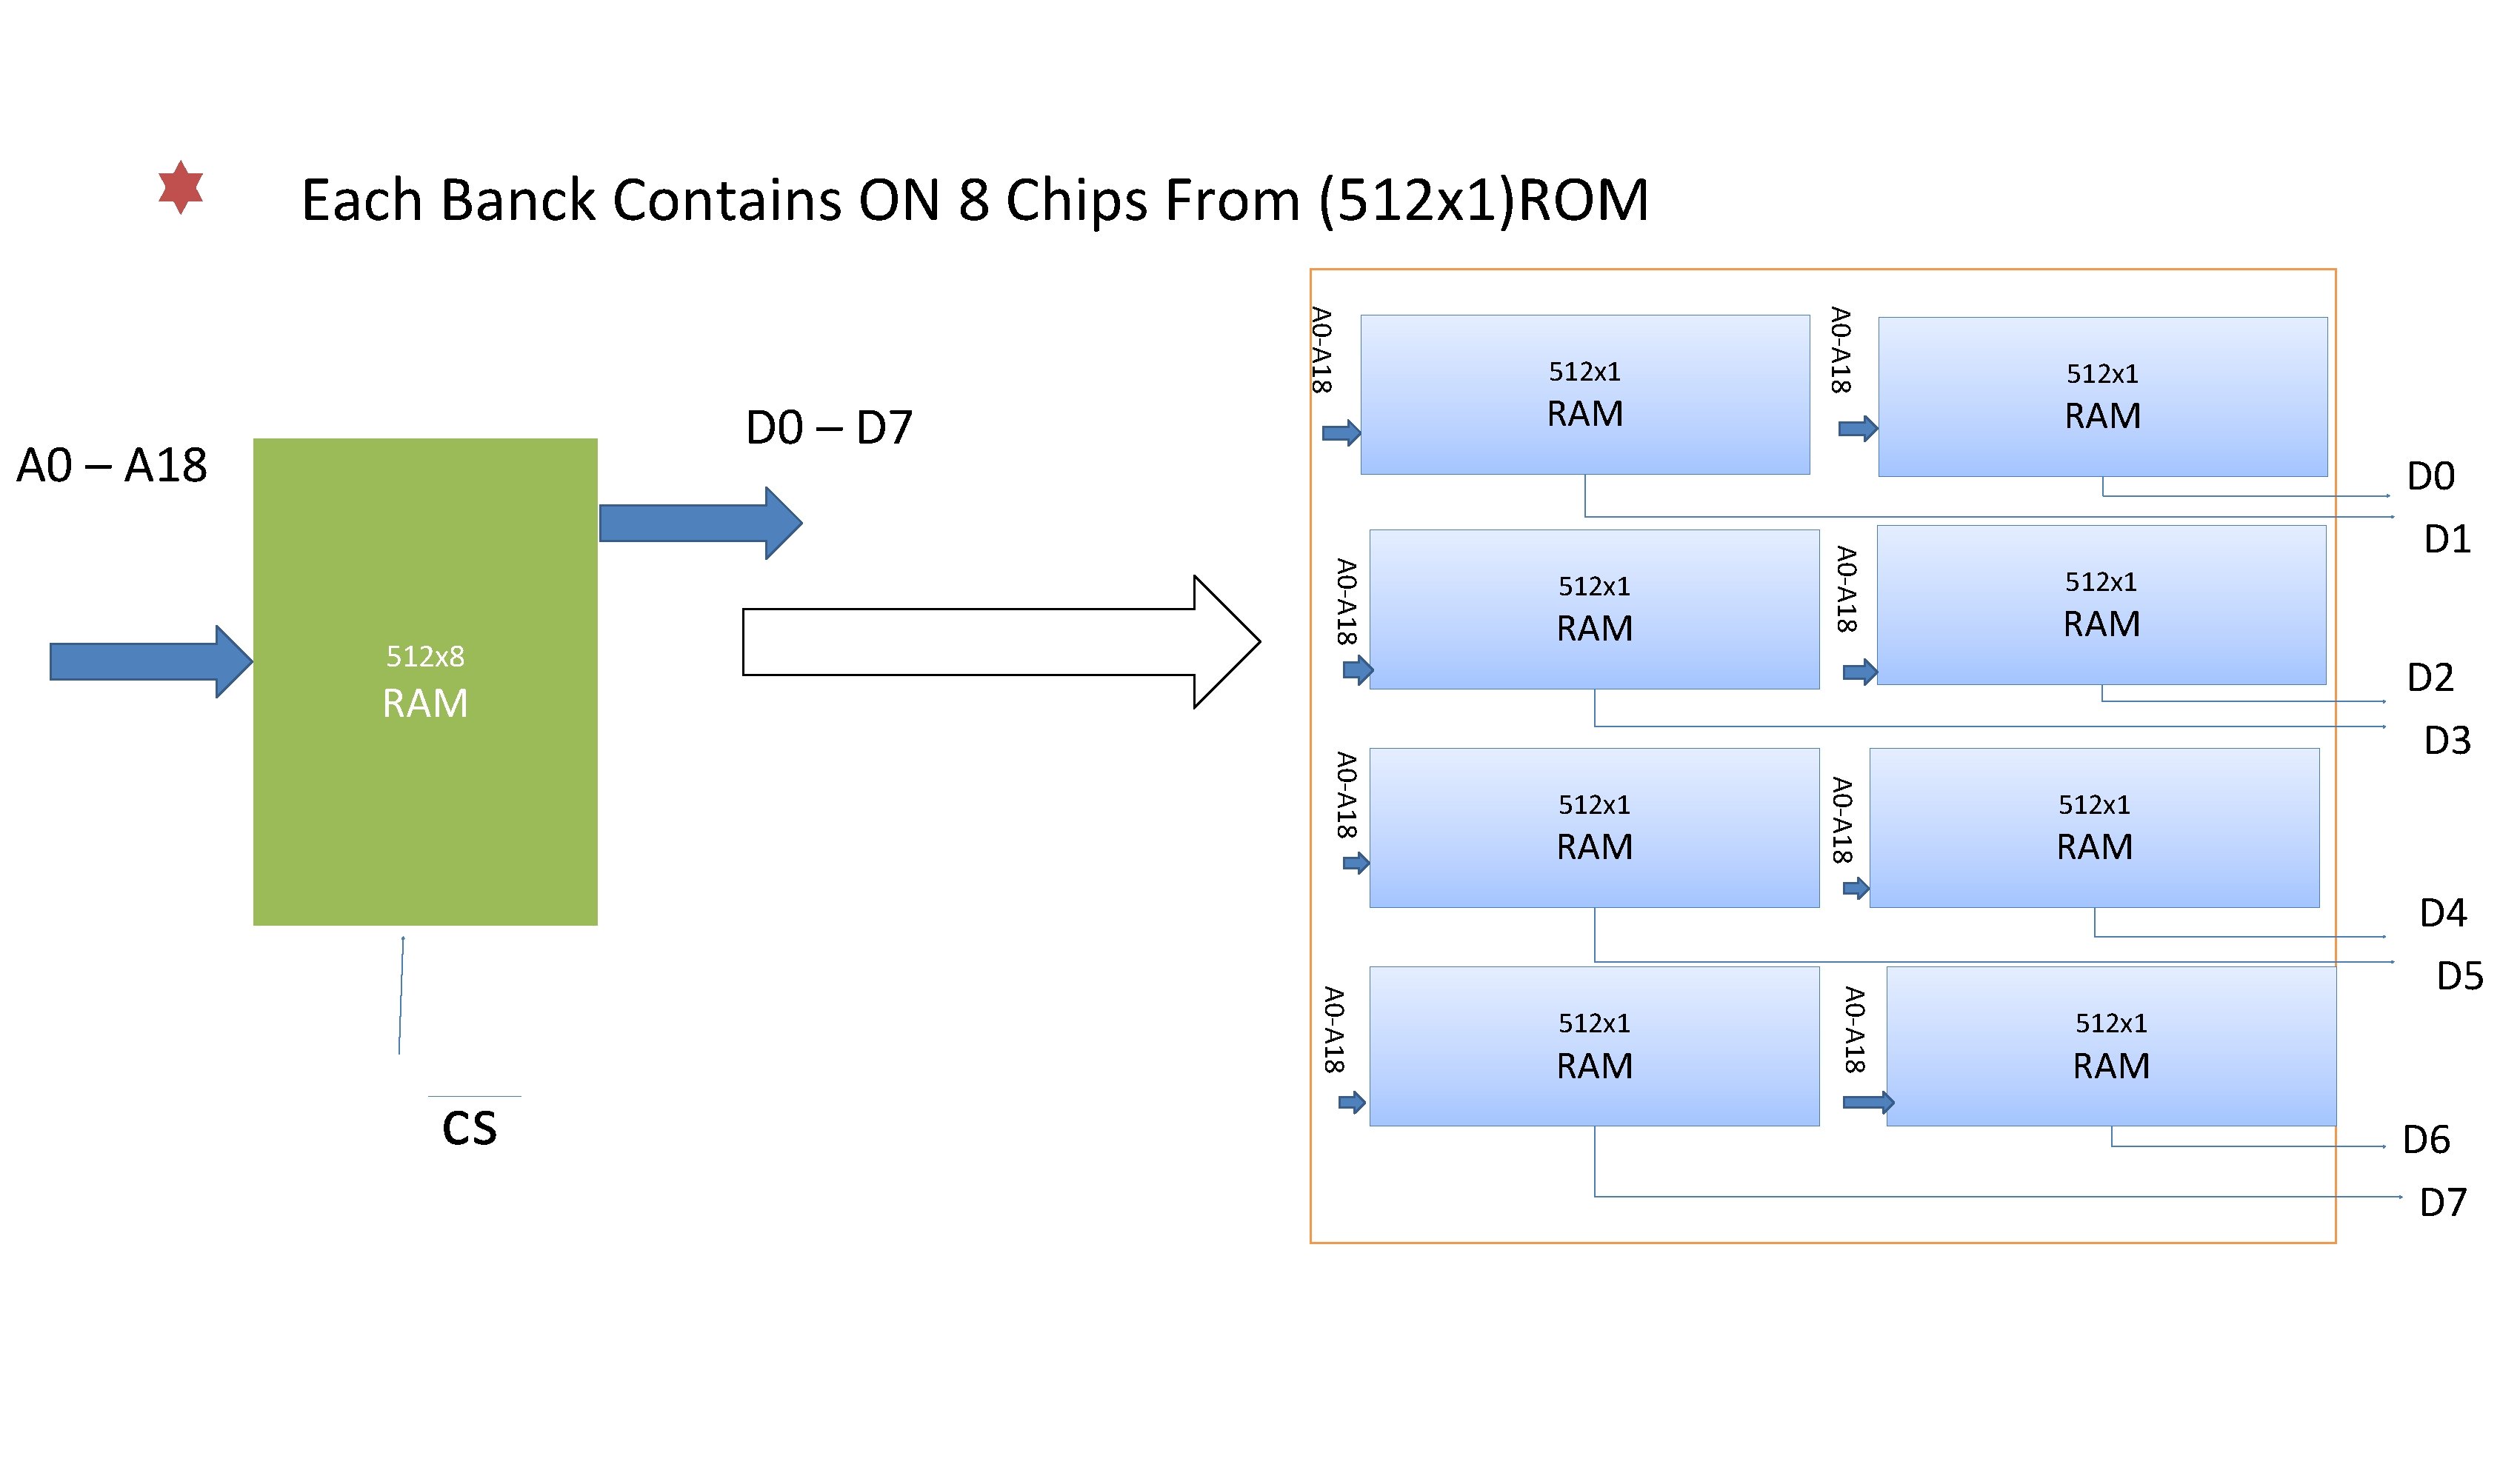 Each Banck Contains ON 8 Chips From (512 x 1)ROM 512 x 1 RAM